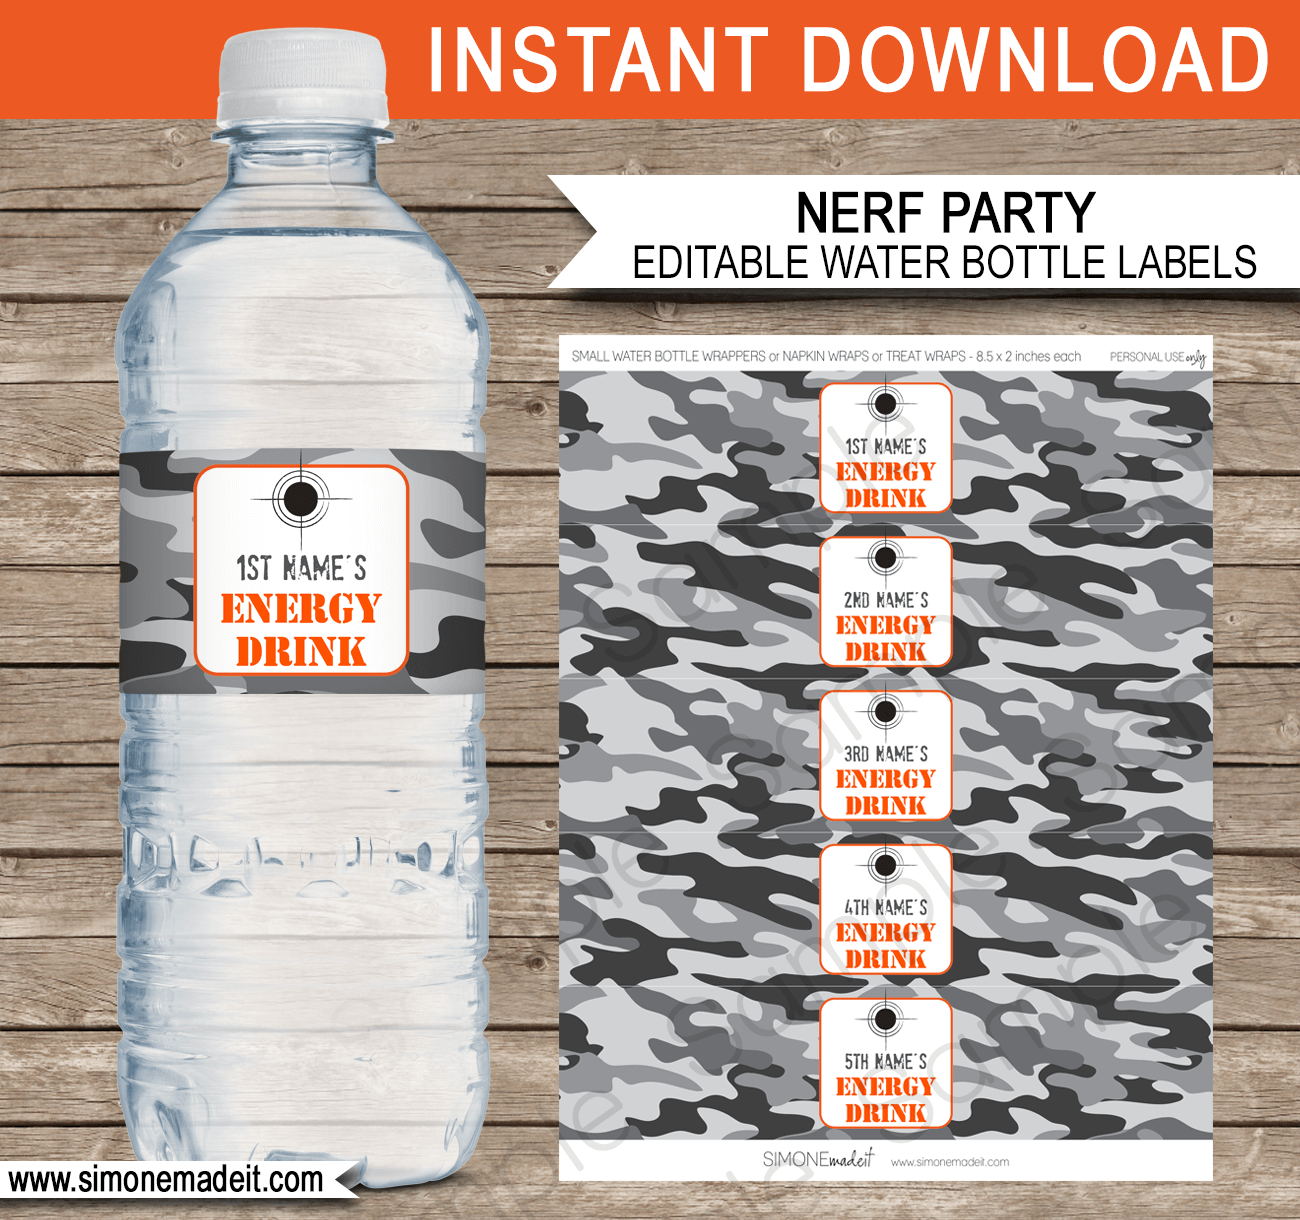 Nerf Party Water Bottle Labels Template | Editable Birthday Party Printable Decorations | $3.00 INSTANT DOWNLOAD via SIMONEmadeit.com